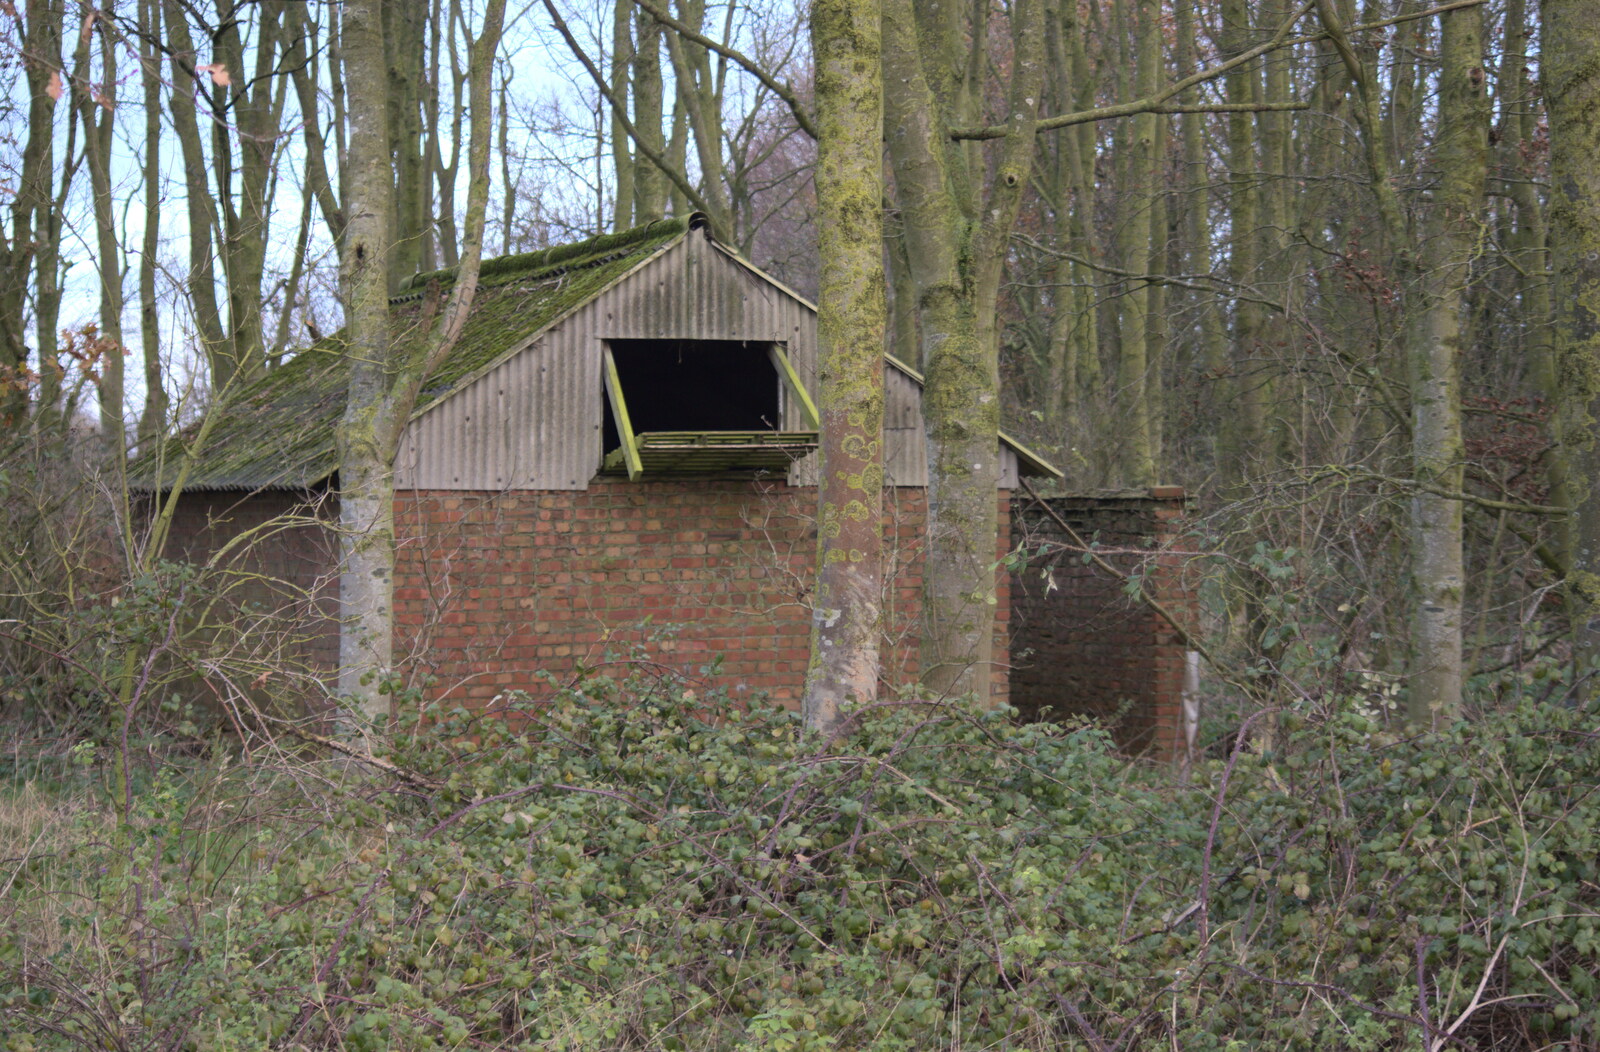 Part of a WWII airfield shed from More Frosty Rides and the Old Mink Sheds, Brome, Suffolk - 10th December 2020